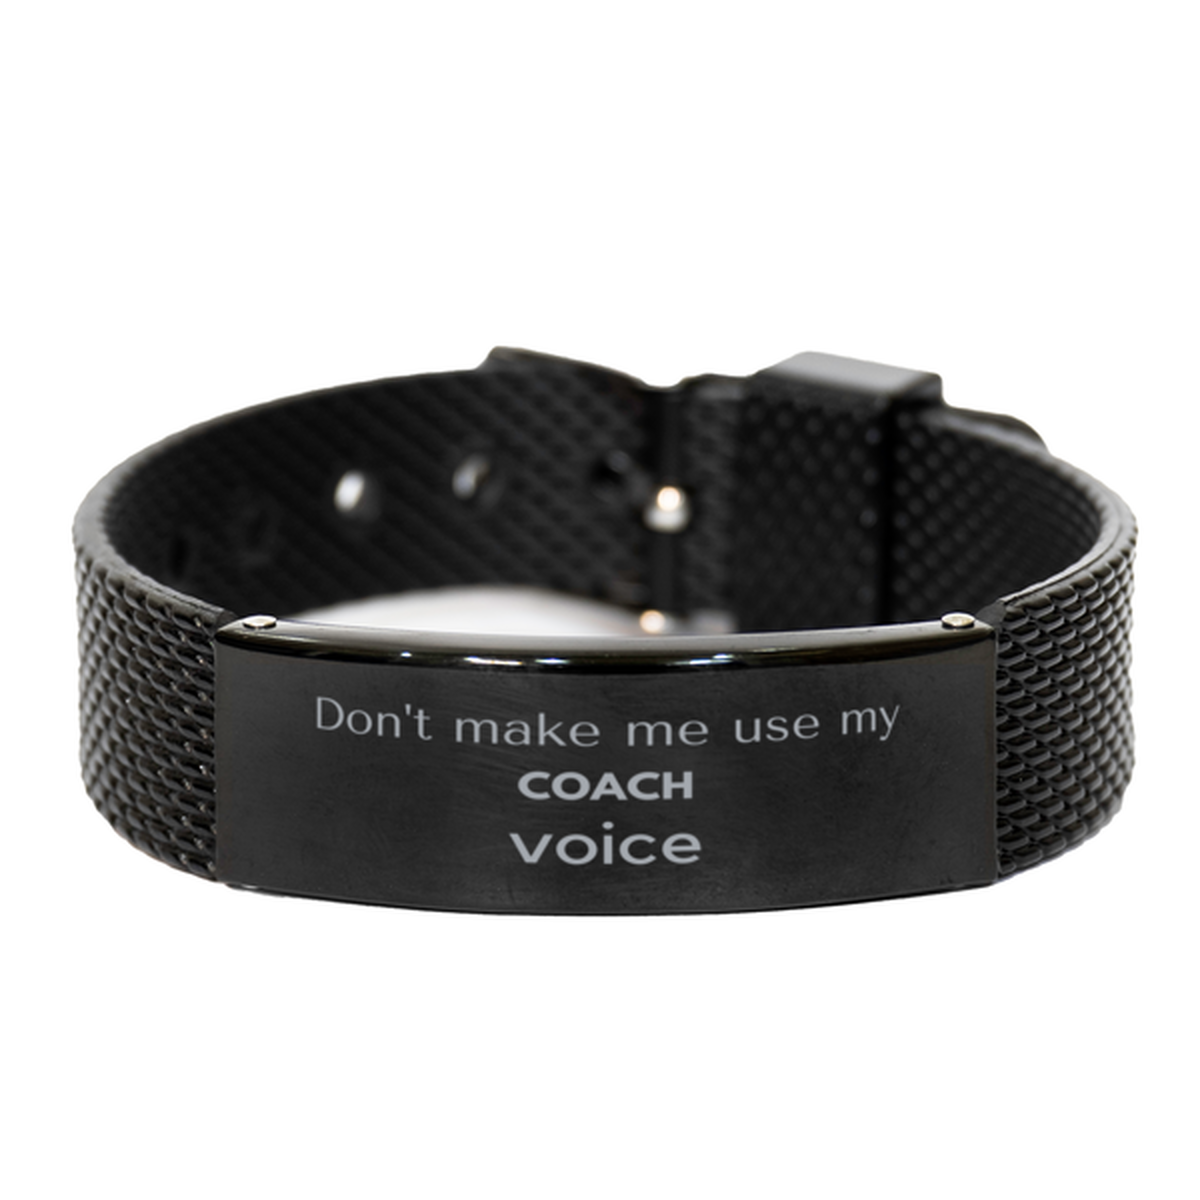 Don't make me use my Coach voice, Sarcasm Coach Gifts, Christmas Coach Black Shark Mesh Bracelet Birthday Unique Gifts For Coach Coworkers, Men, Women, Colleague, Friends